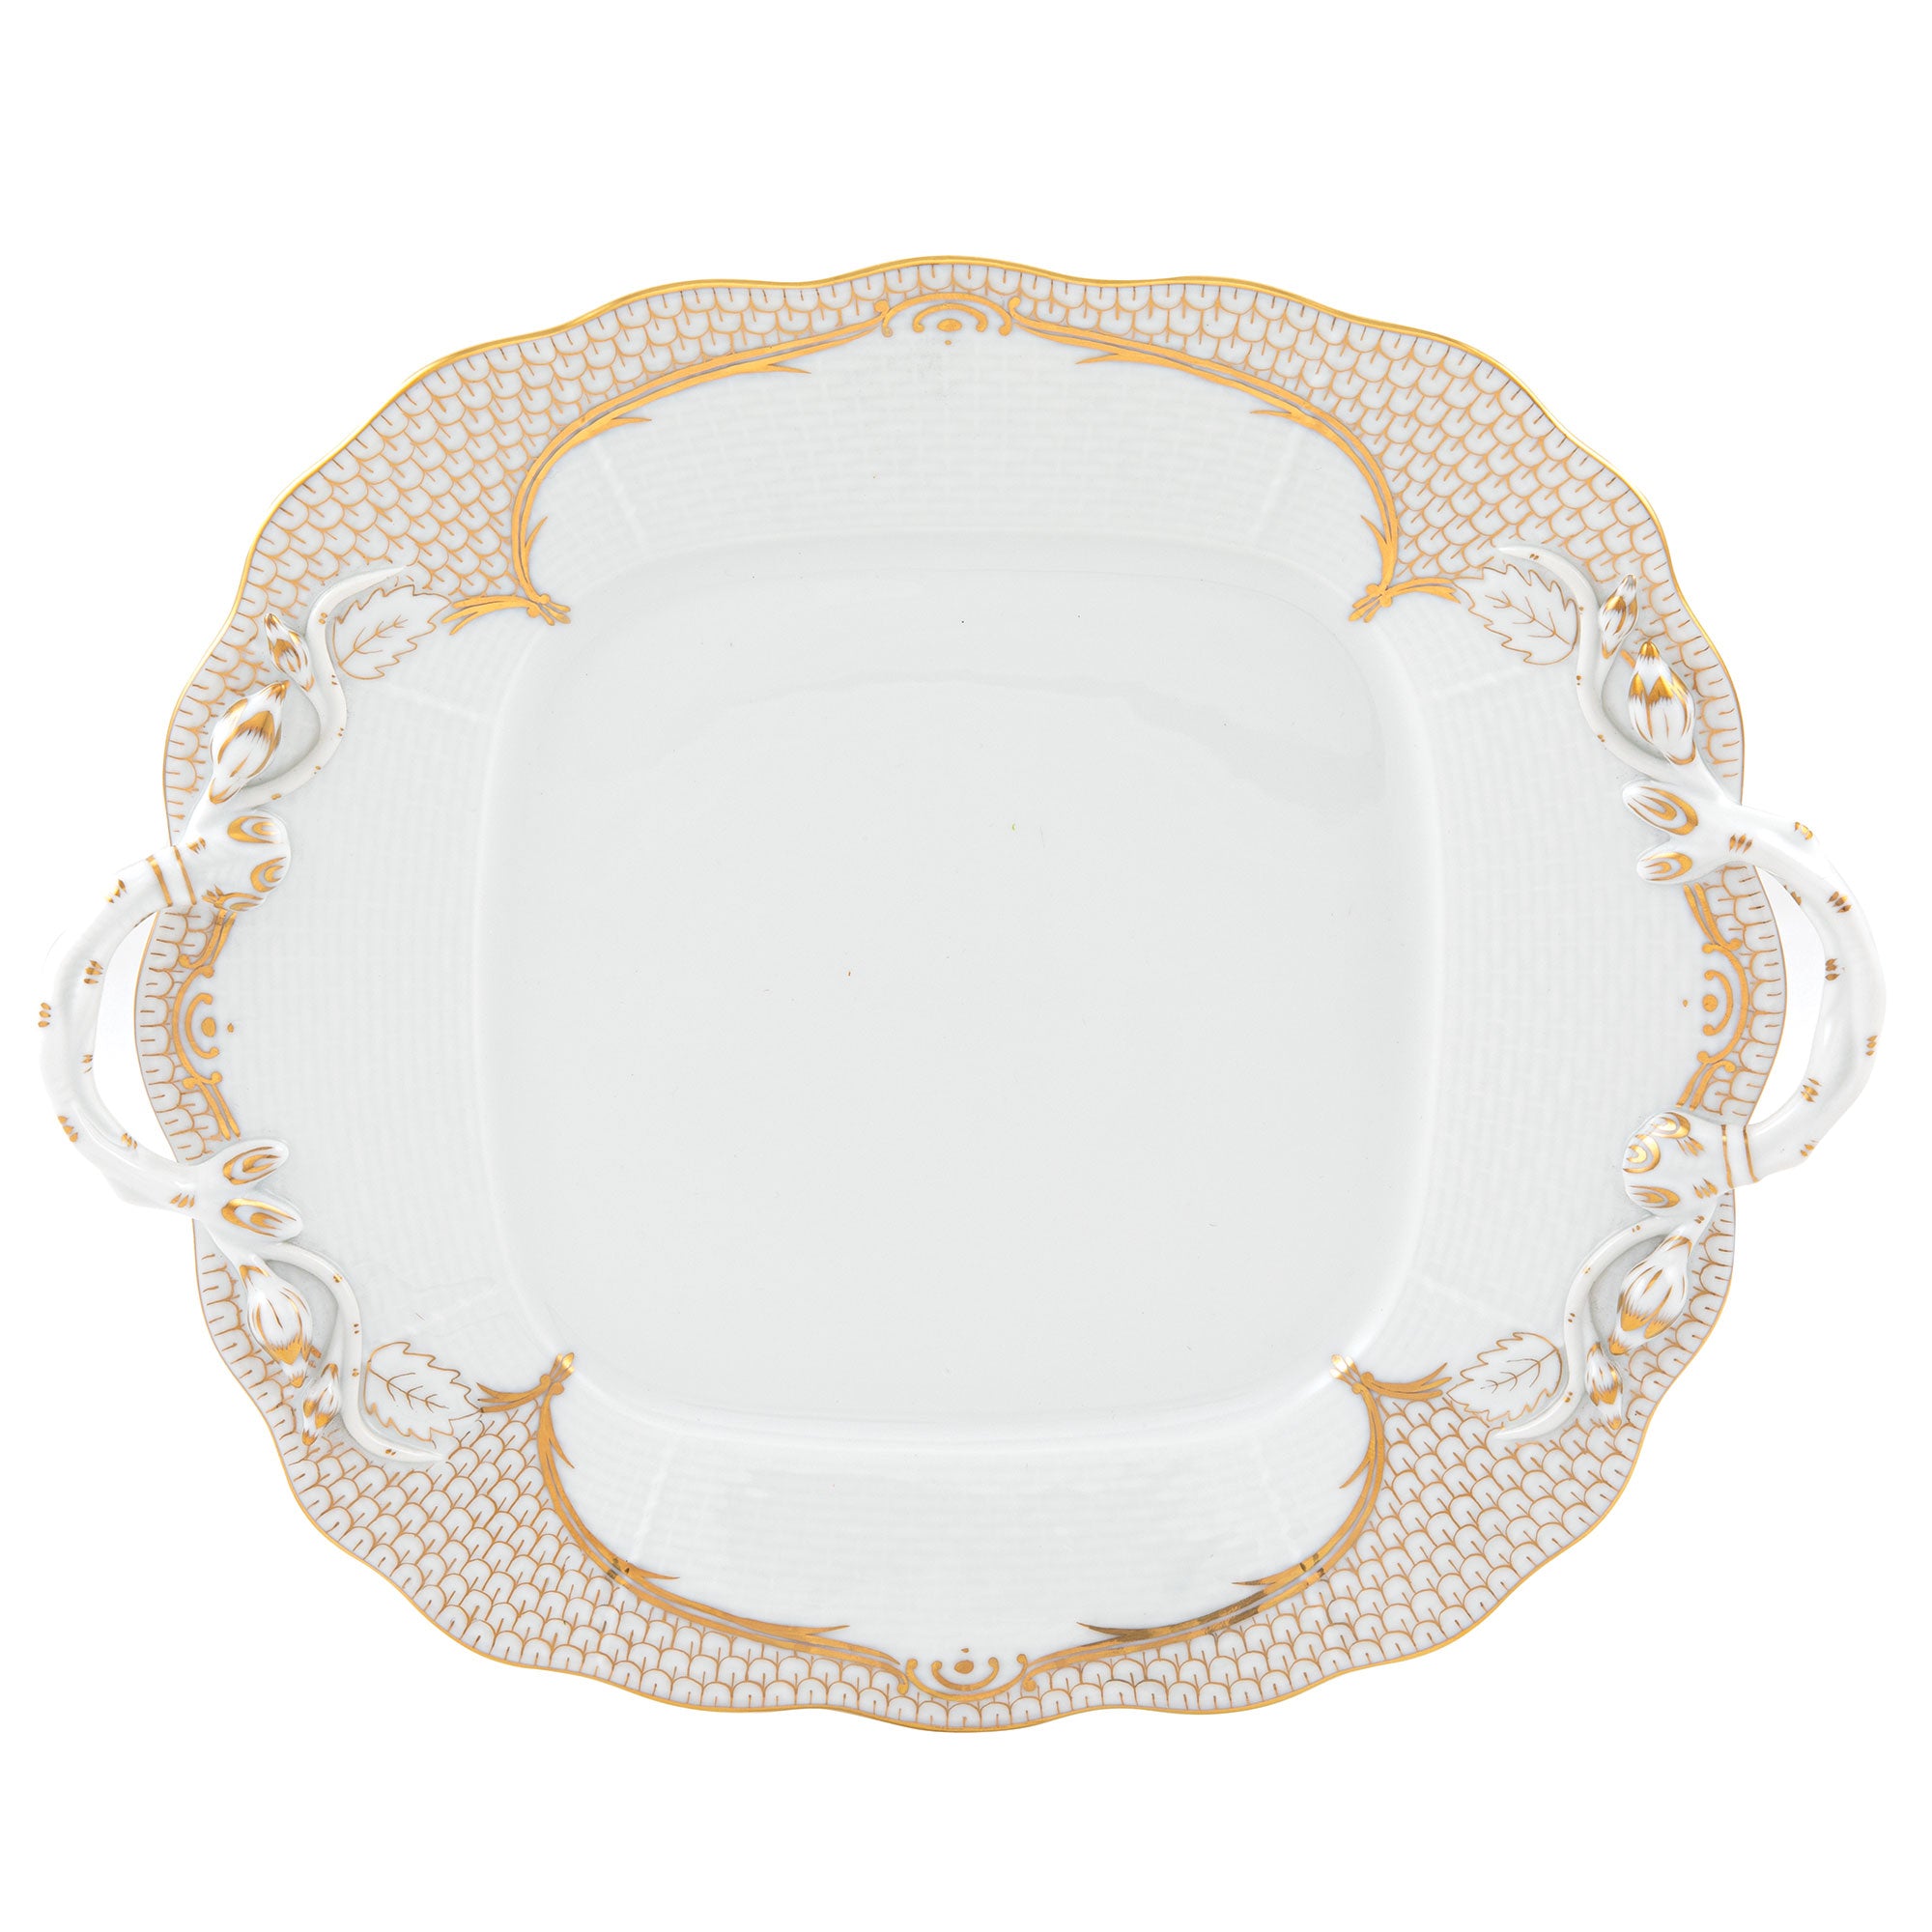 Herend Golden Elegance Square Cake Plate W/handles 9.5"sq